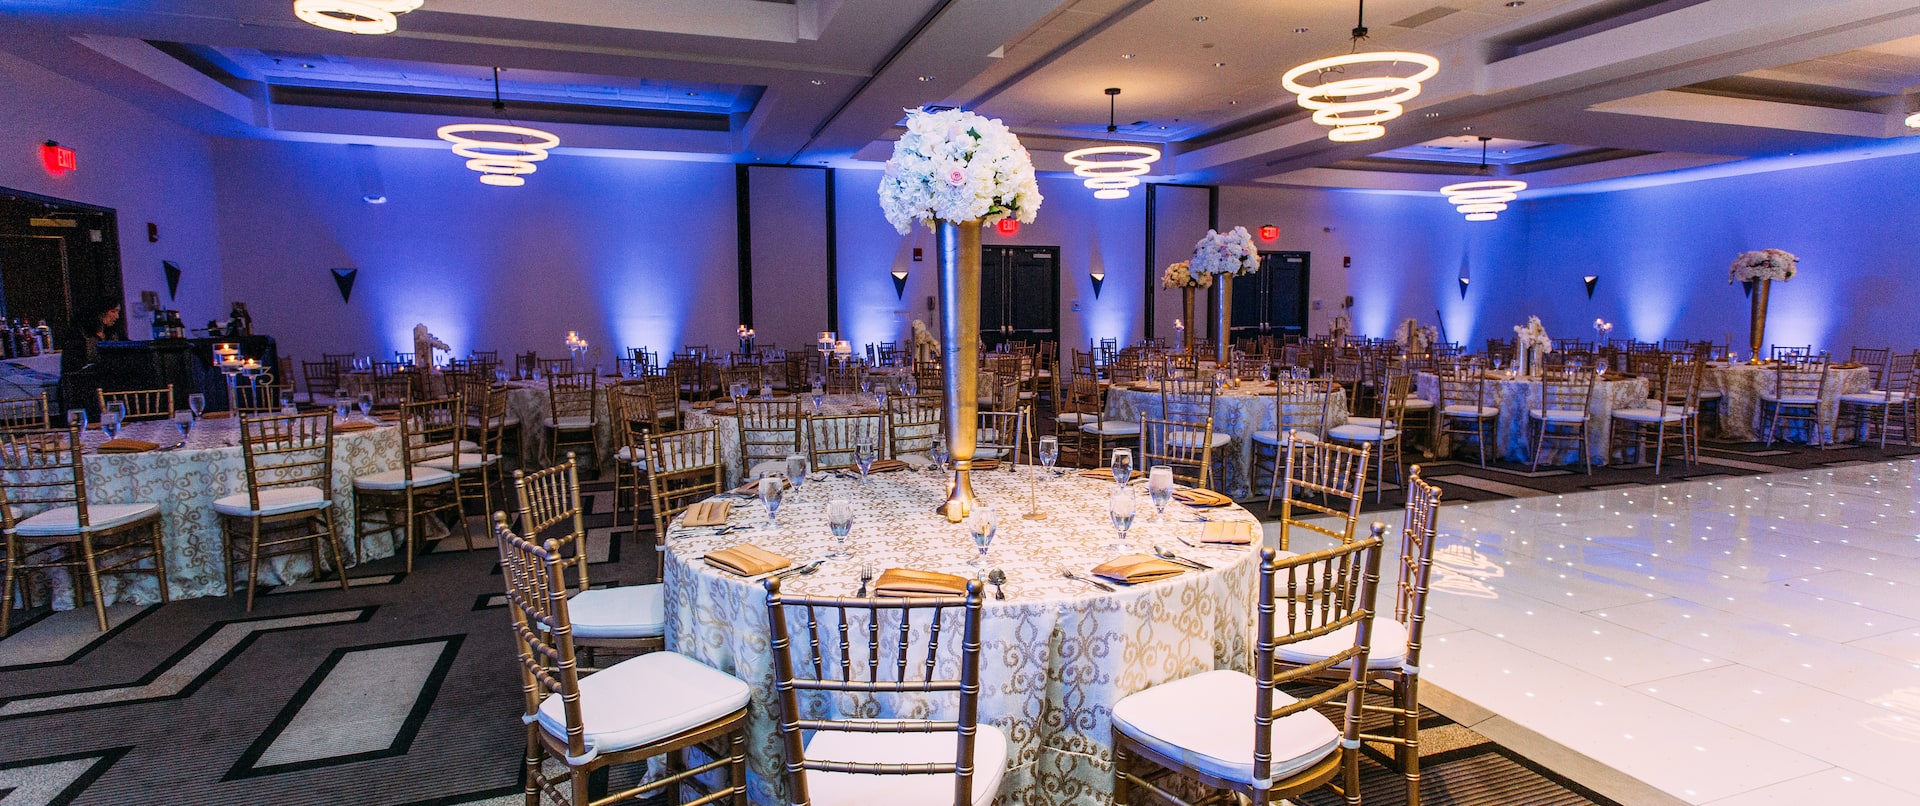 Wedding ballroom with full dining tables setup and partial view of dance floor